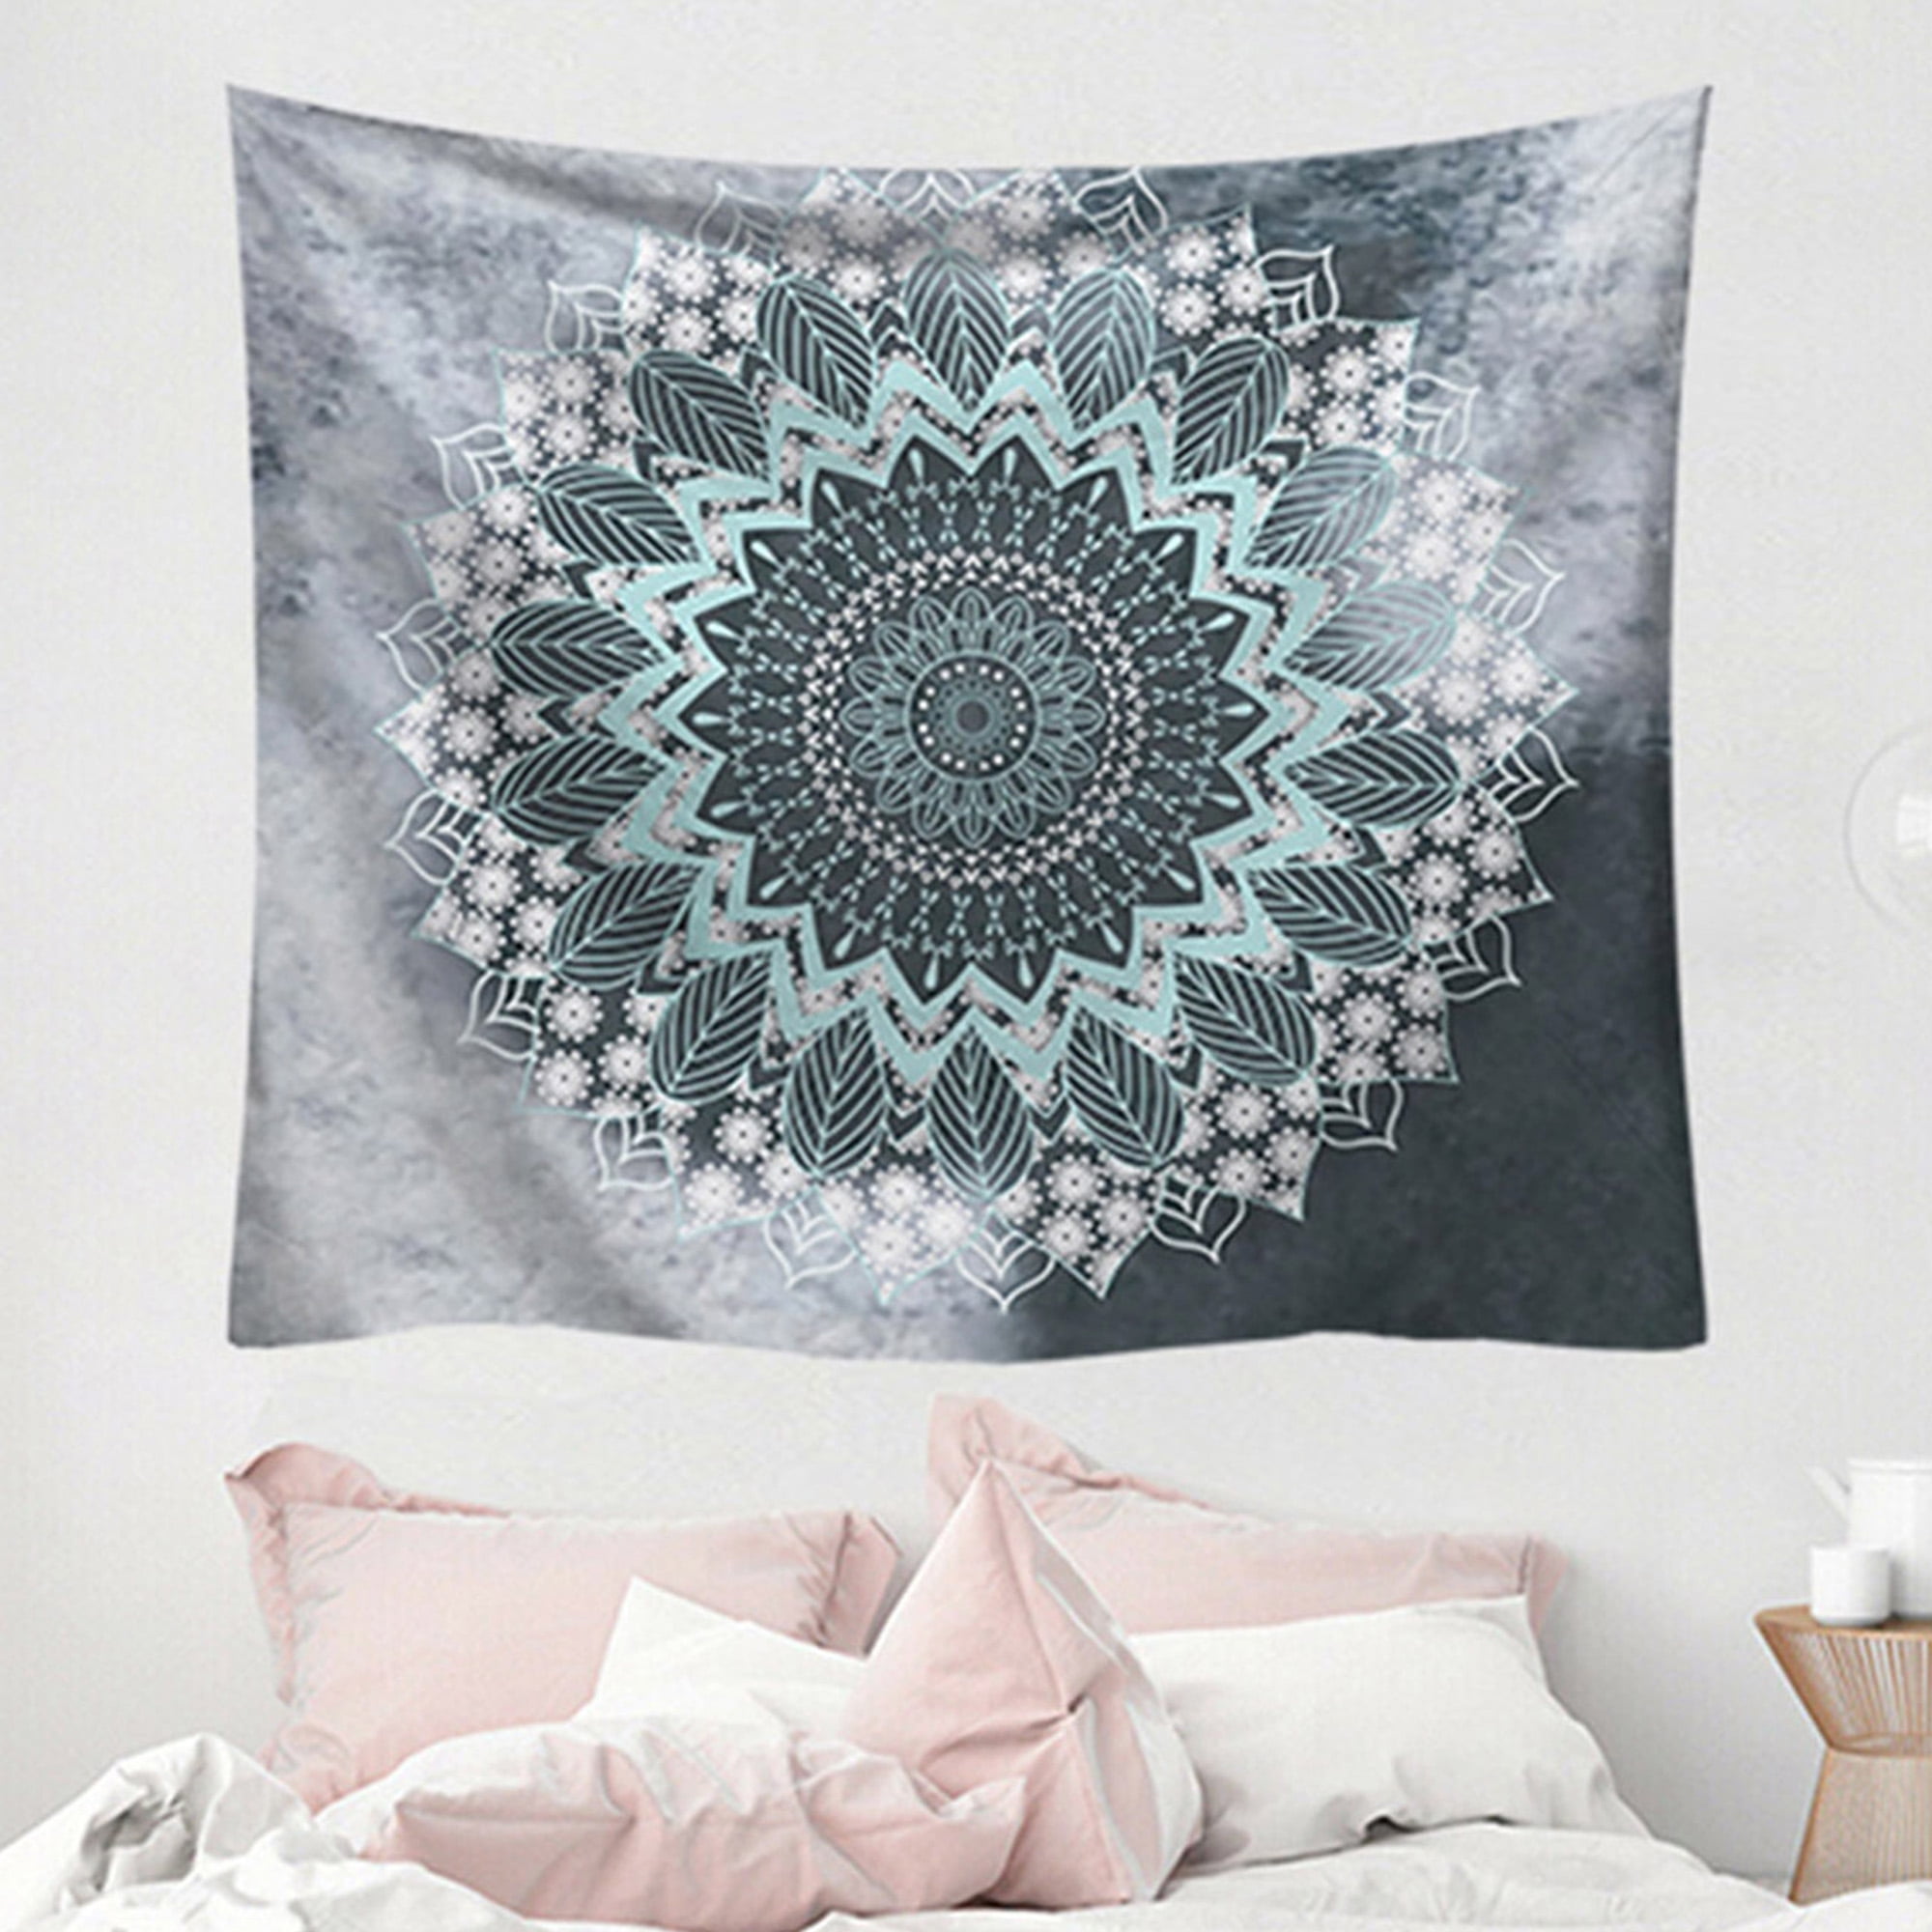 Decor For Dorm Living Room Bedroom Psychedelic Flower Tapestry Trippy Hippie Bohemian Wall Tapestry Psychedelic Mandala Tapestry